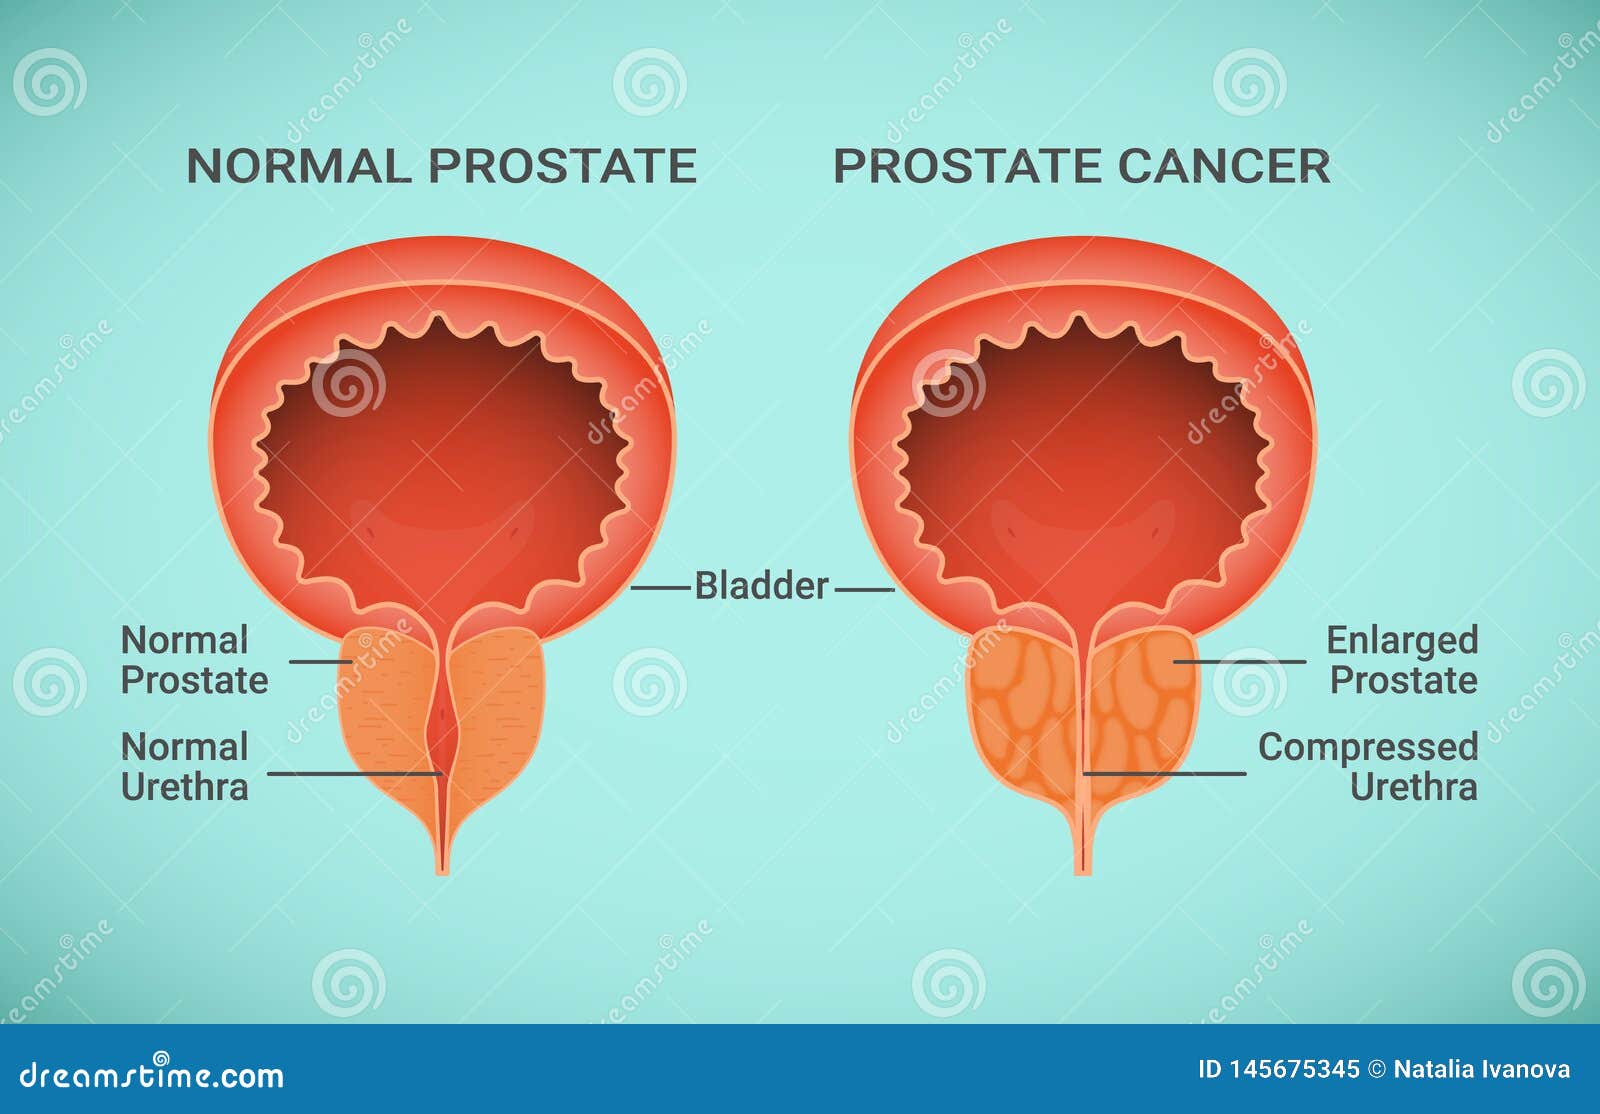 healthy prostate